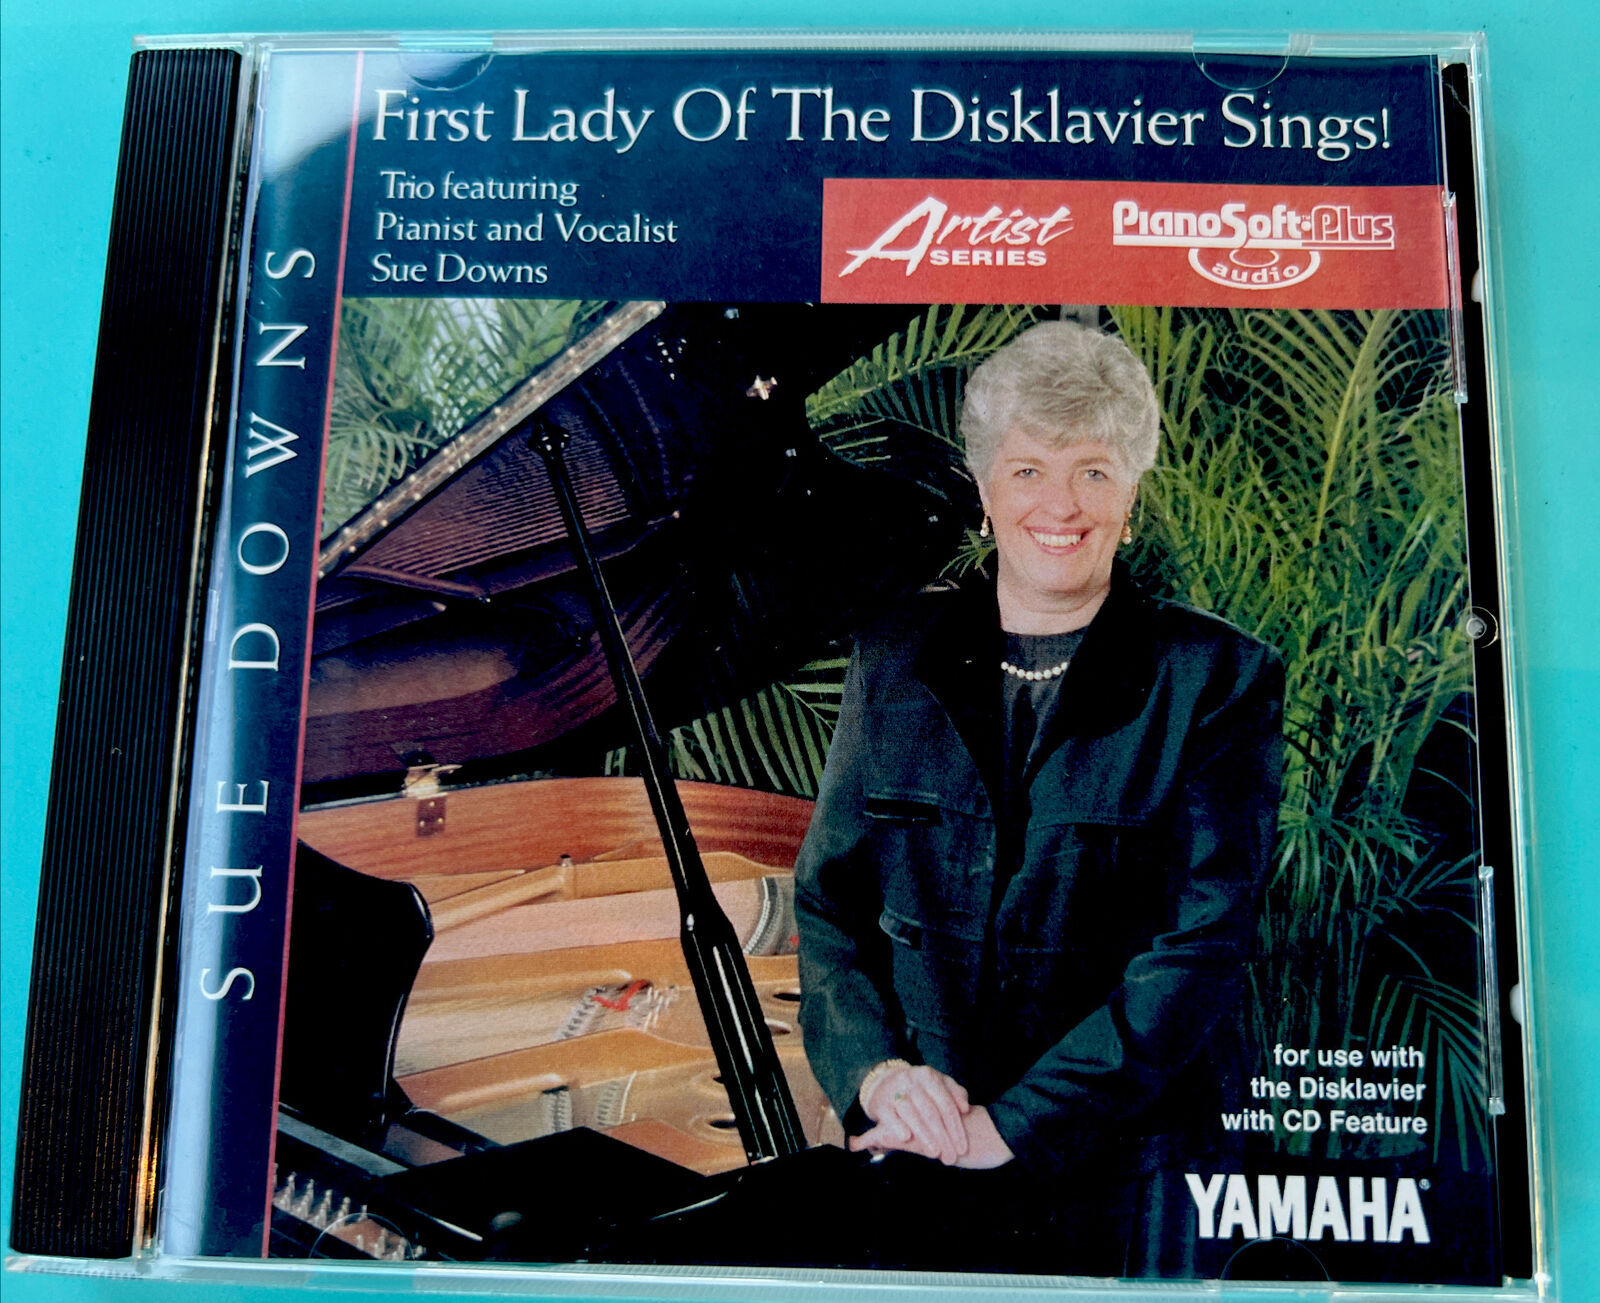 FIRST LADY OF DL SUE DOWNS SINGS Yamaha Disklavier CD PLAYER PIANO Soft PLUS